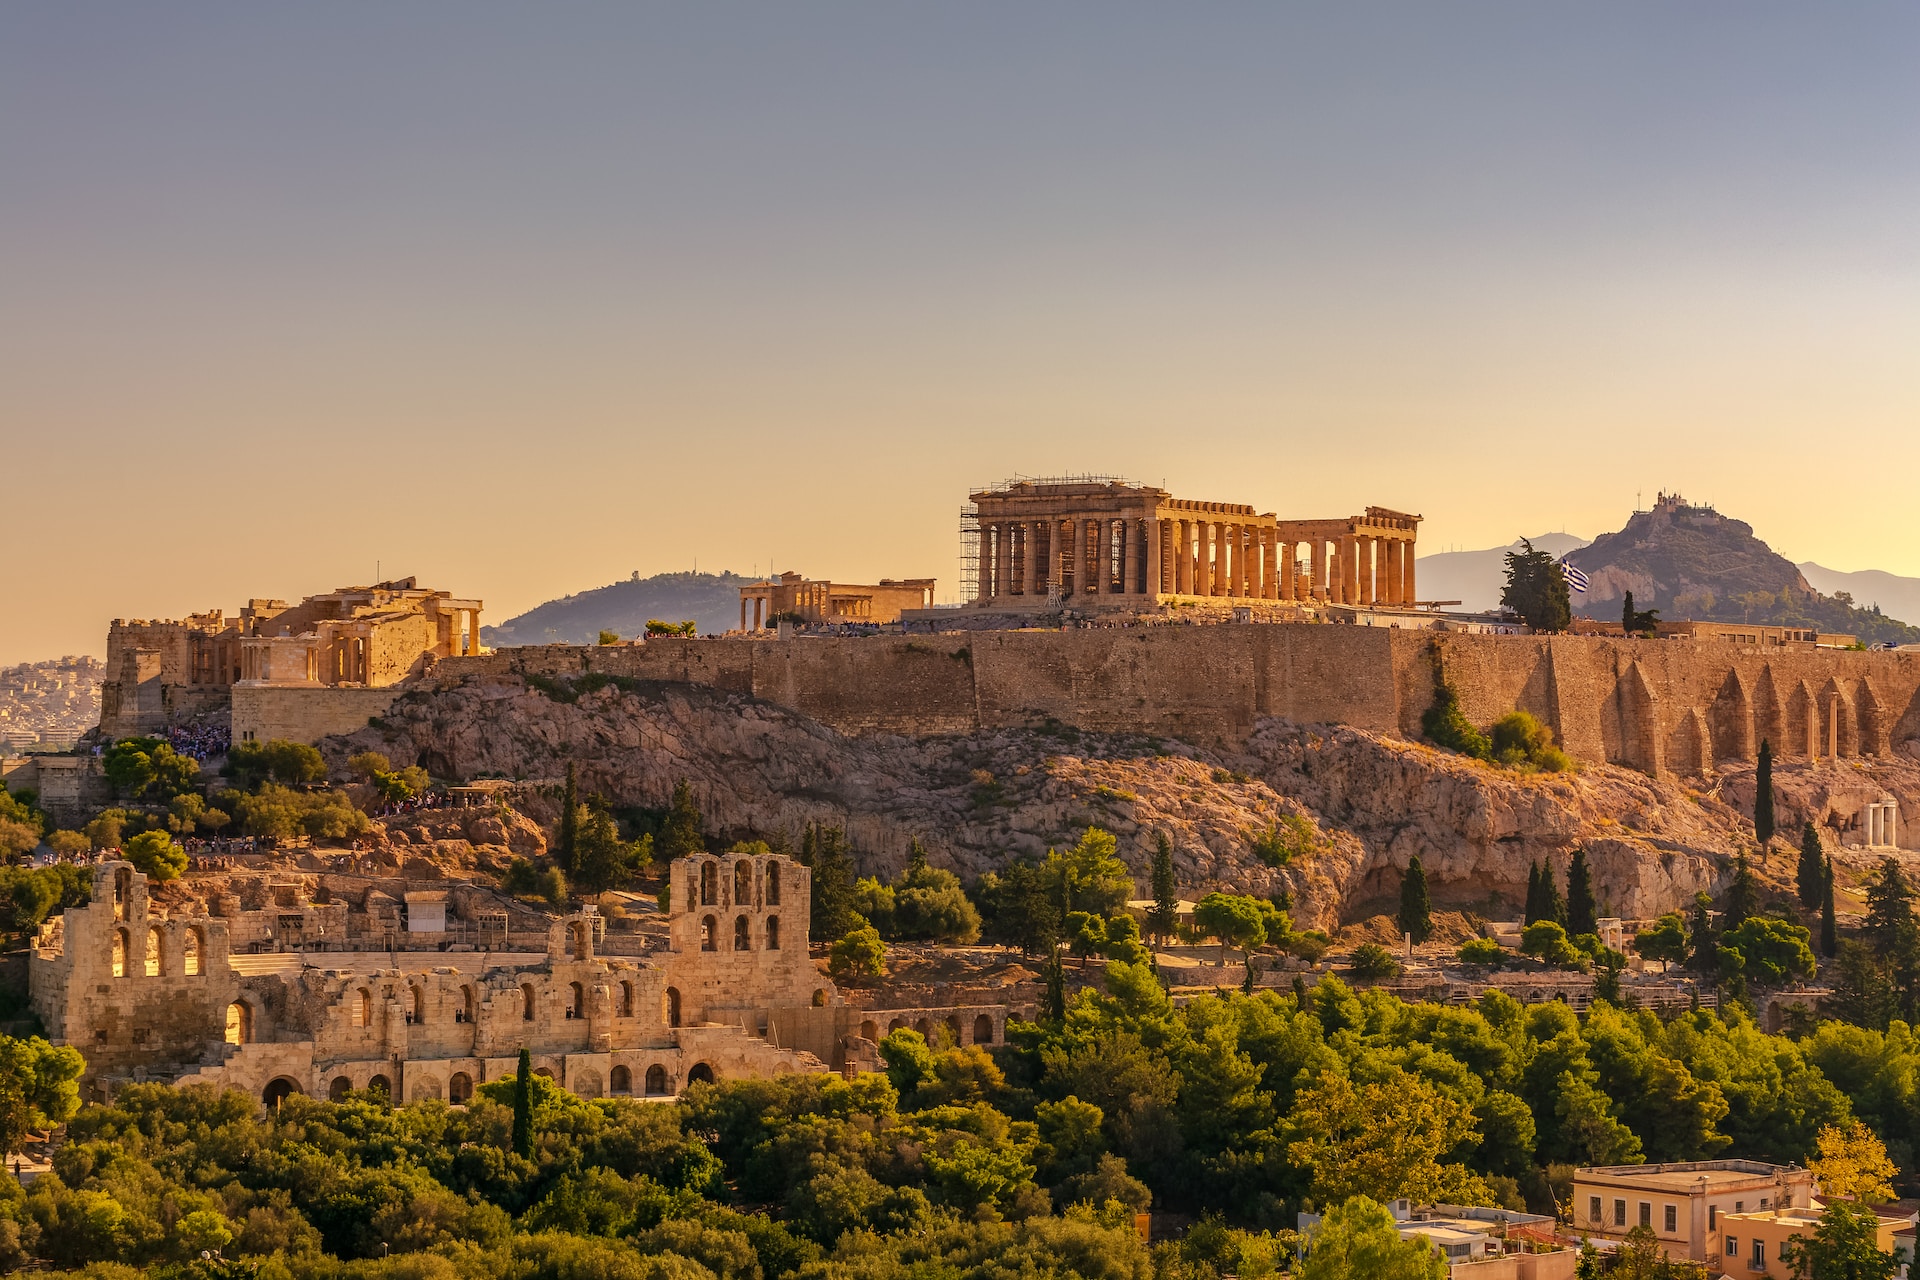 Acropolis to offer private elitist tours